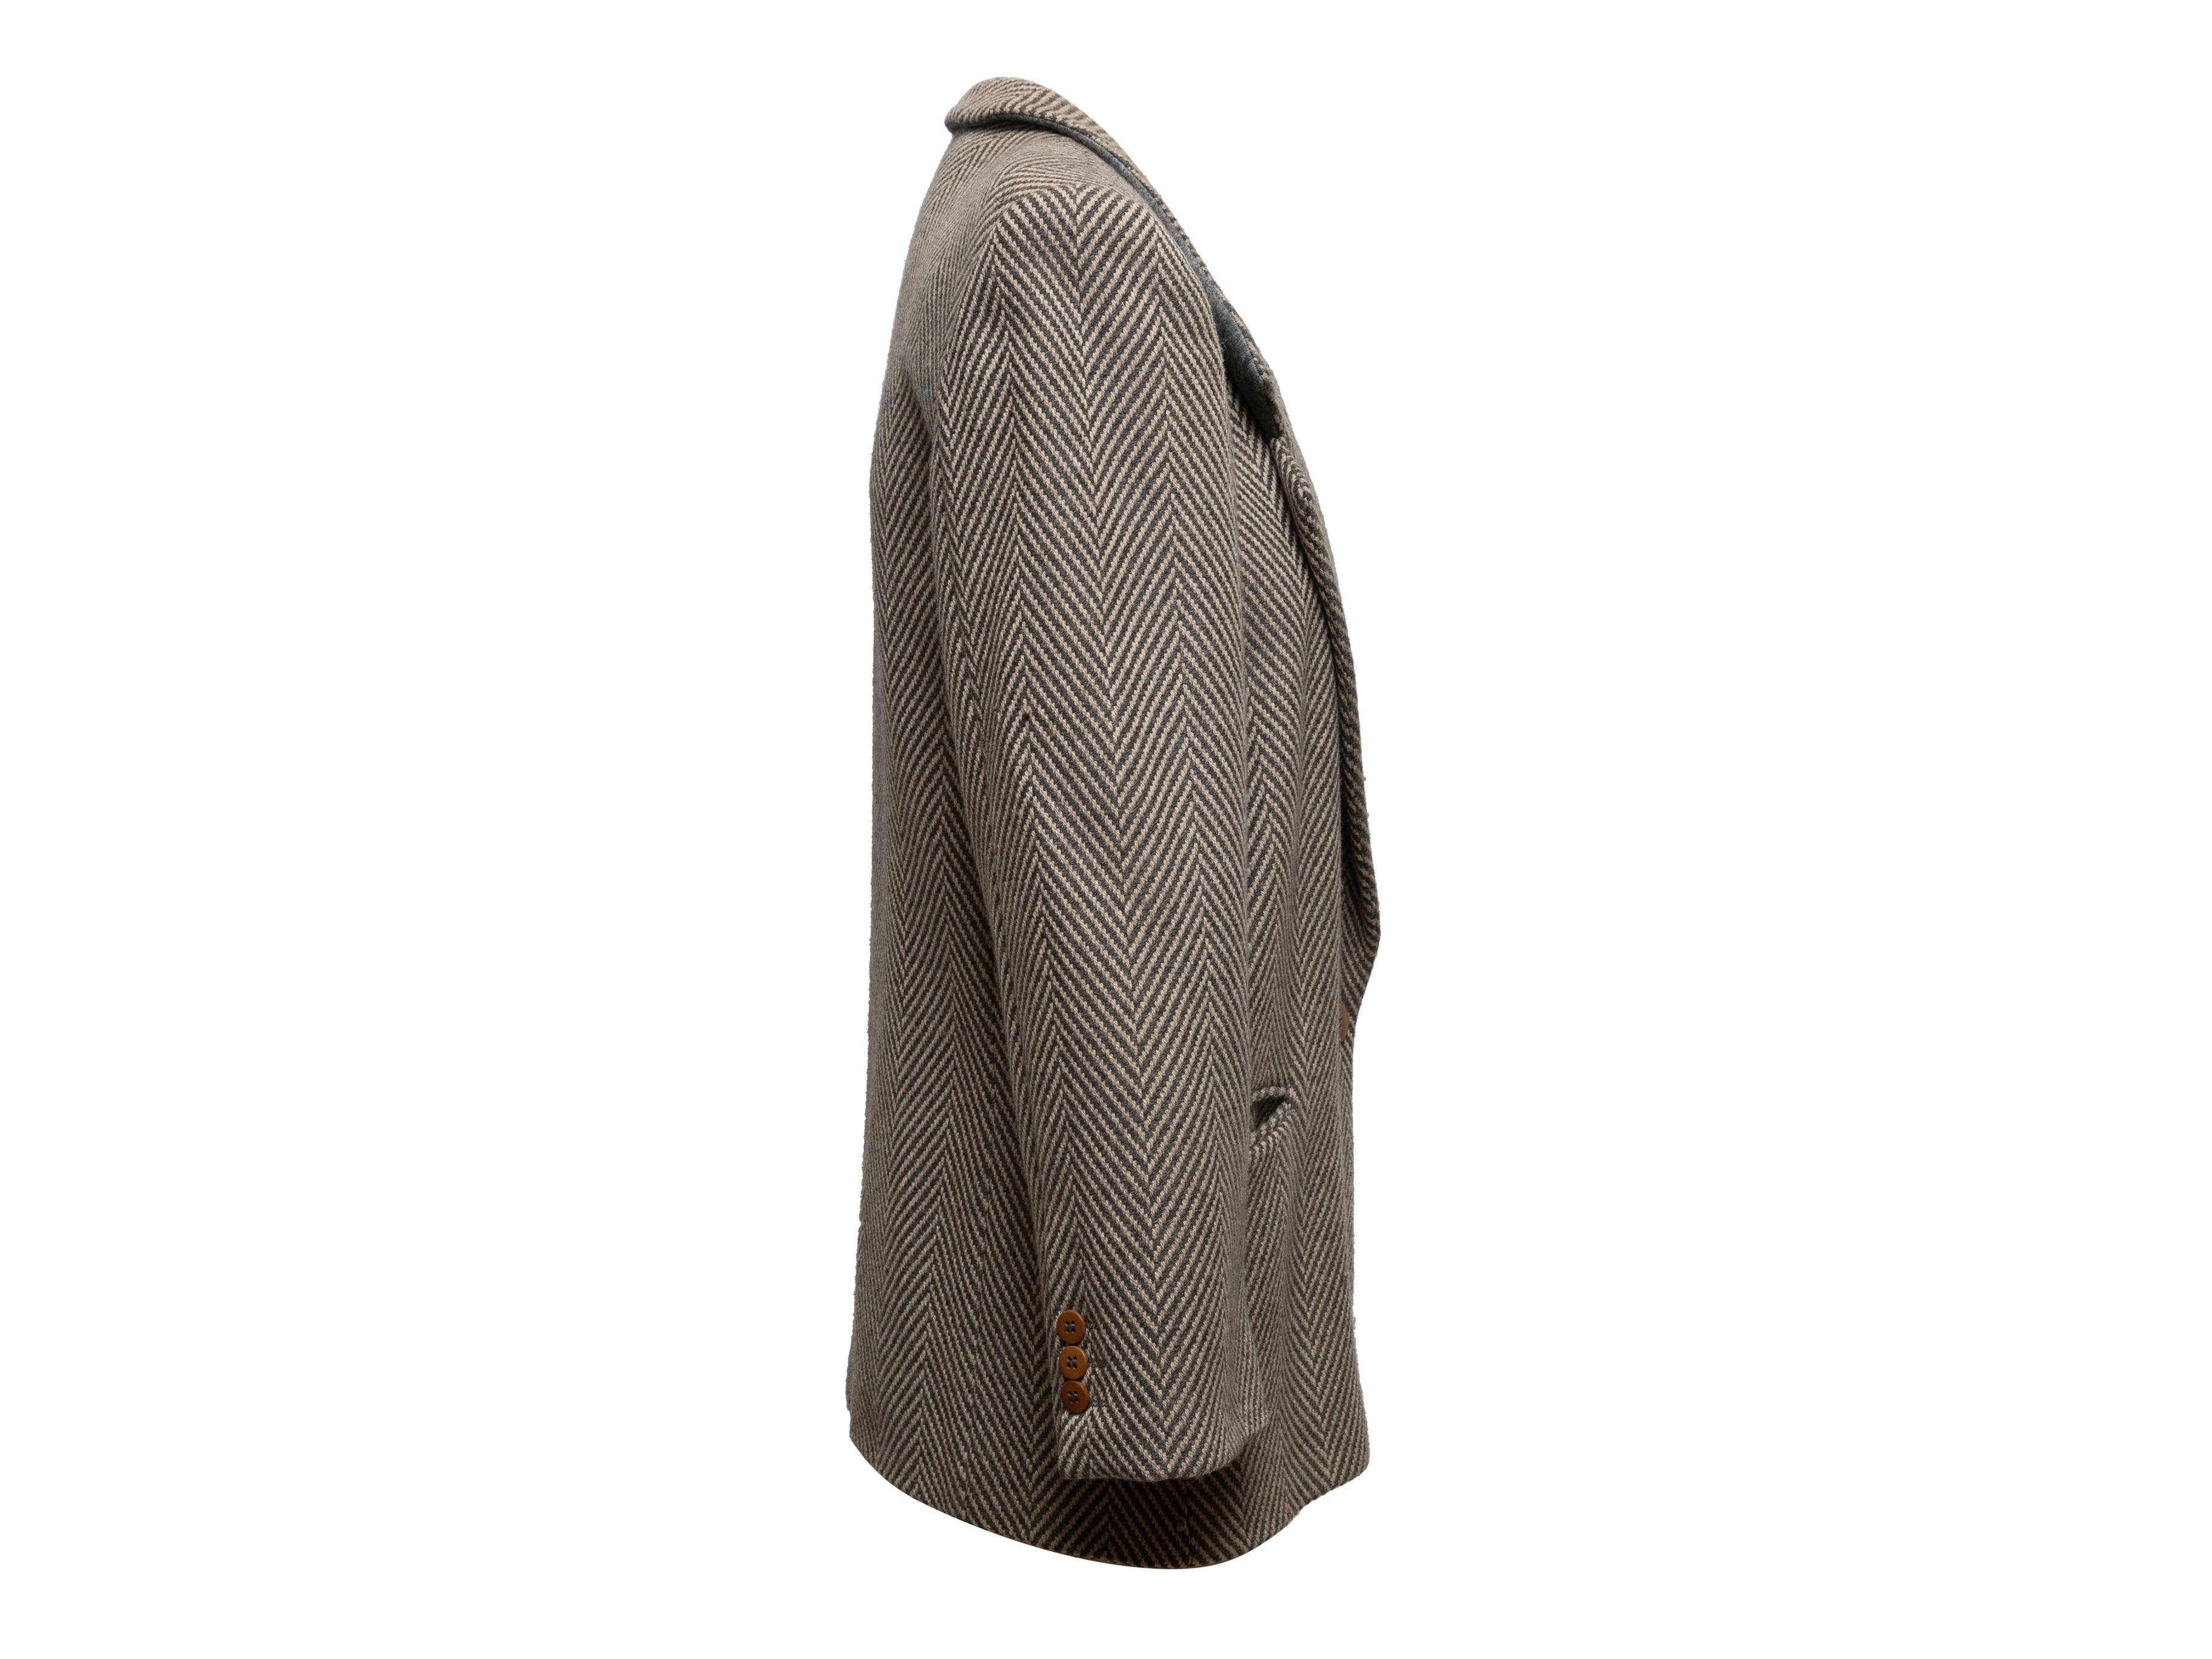 Vintage grey and beige virgin wool herringbone blazer by Giorgio Armani. Notched lapel. Three pockets. Single button closure at front. 34